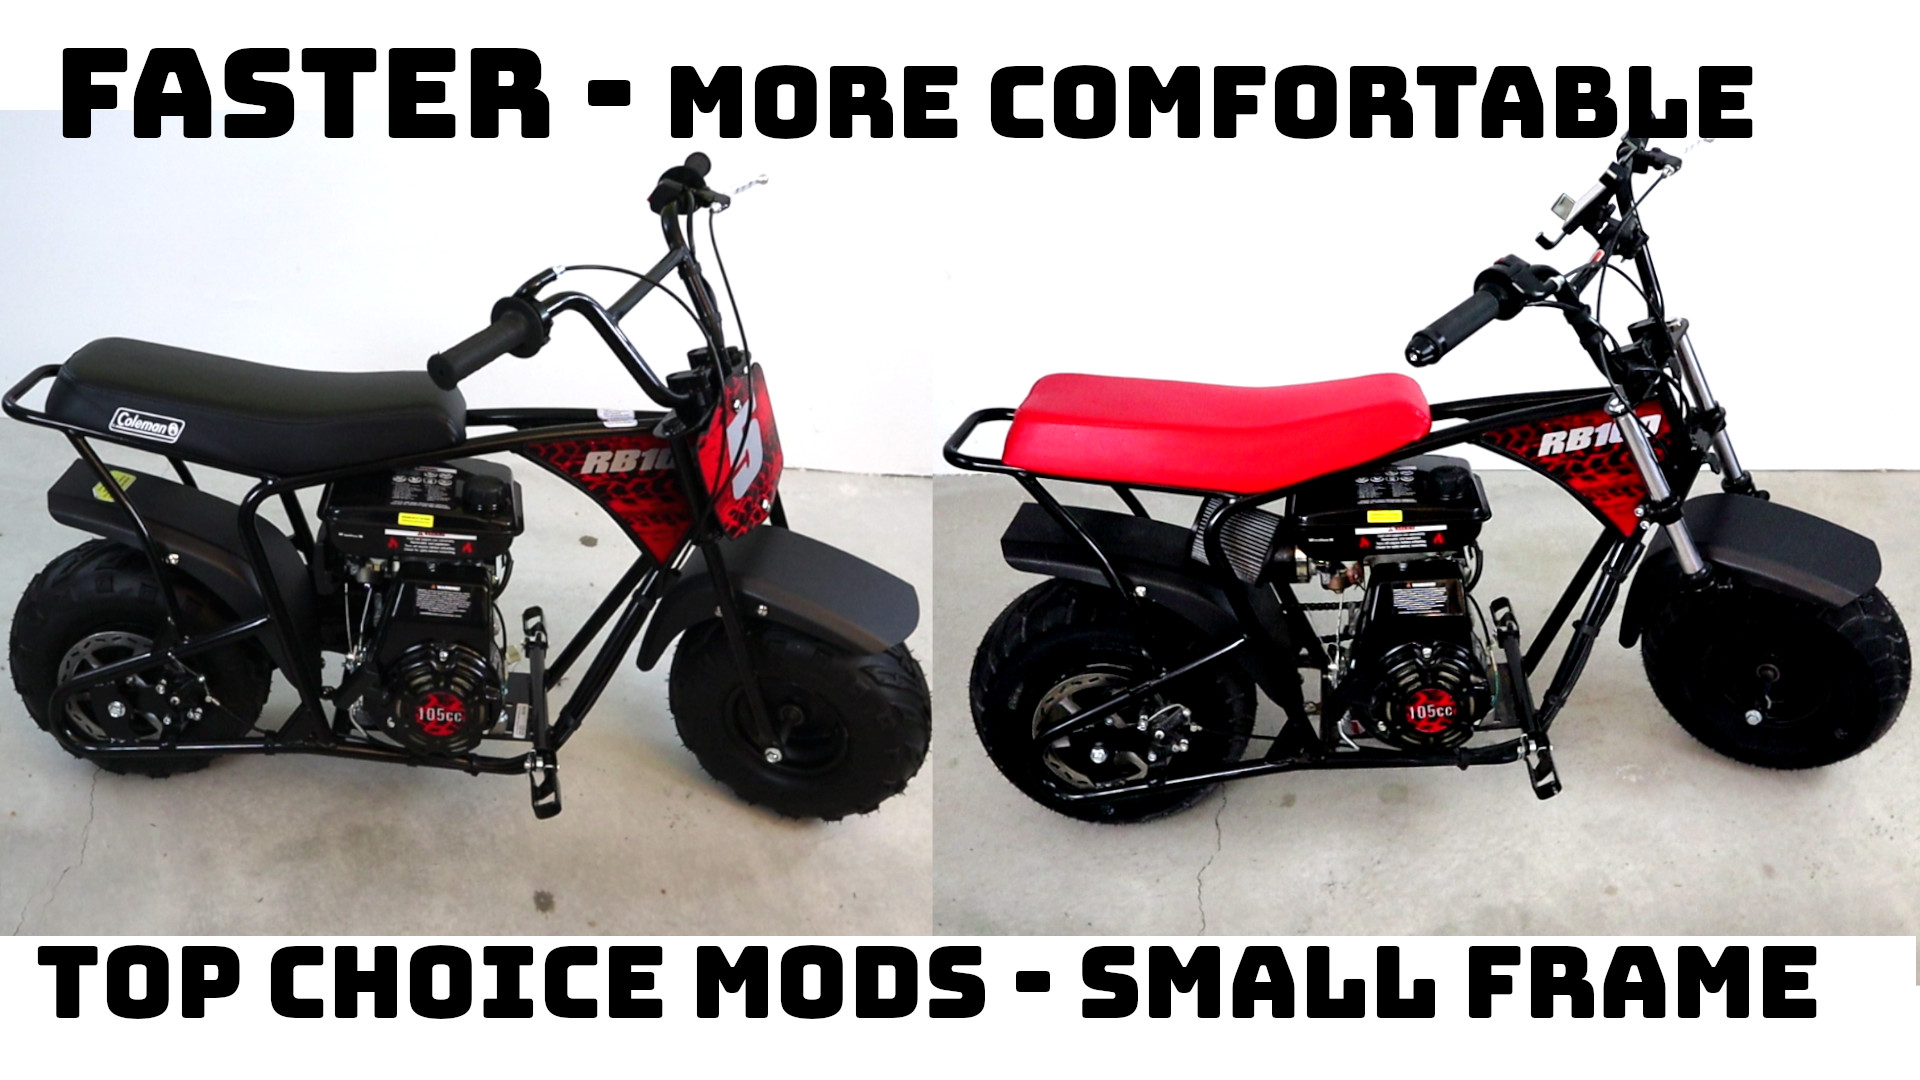 Read more about the article Kids mini bike performance and comfort mods and accessories